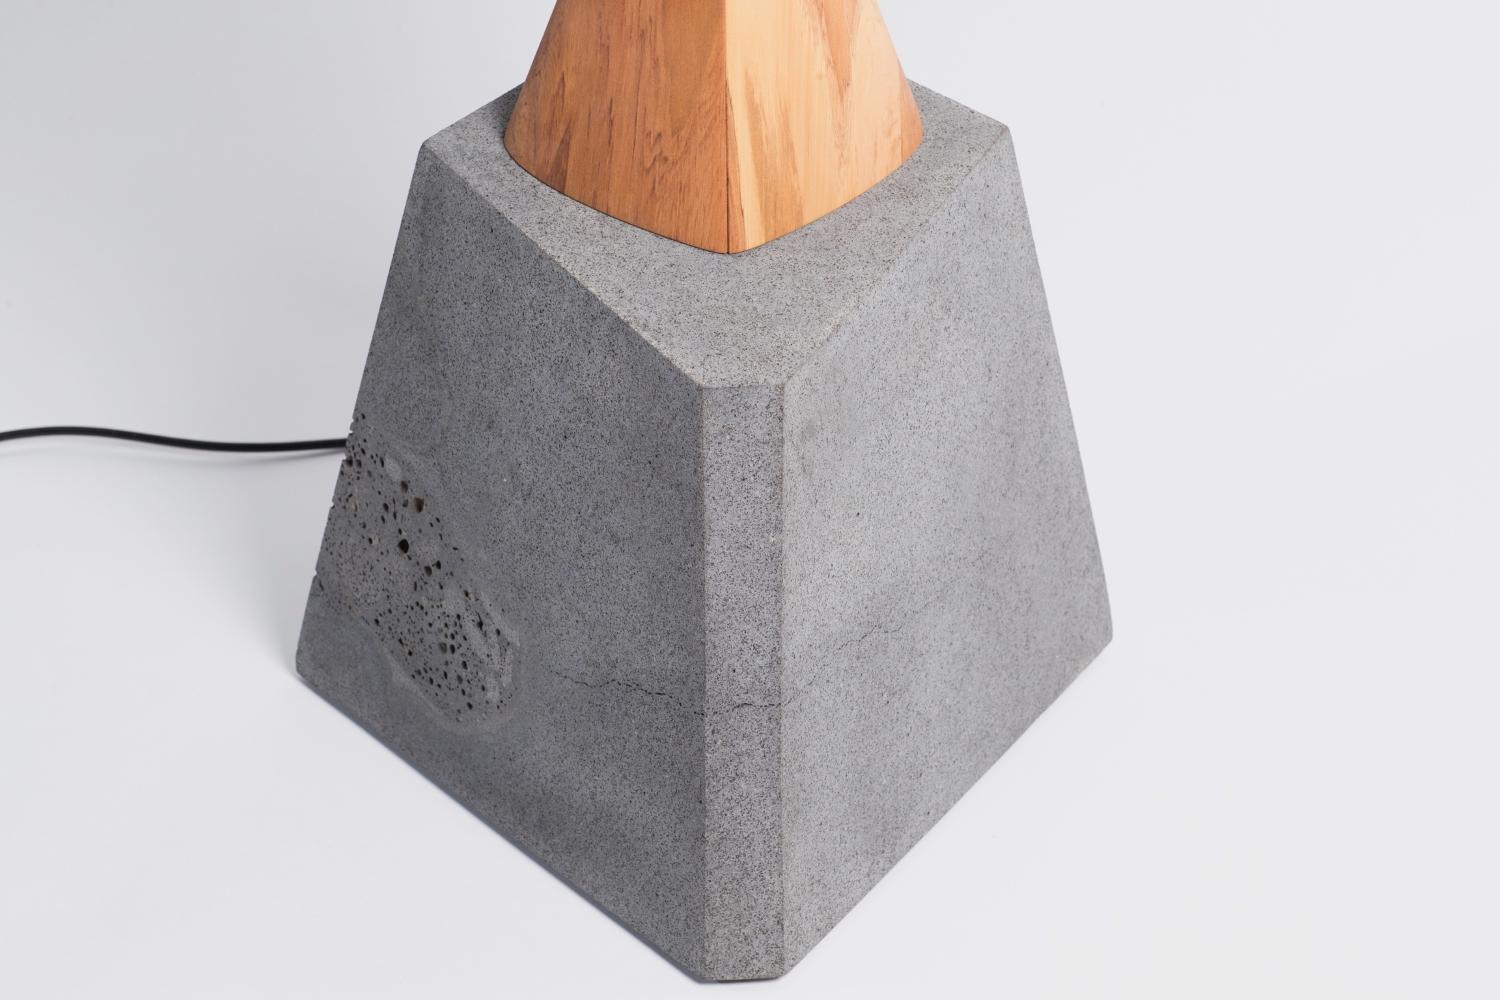 Modern ‘Windswept’ Floor Lamp Sculpture in Sustainable Ancient Wood and Stone 2